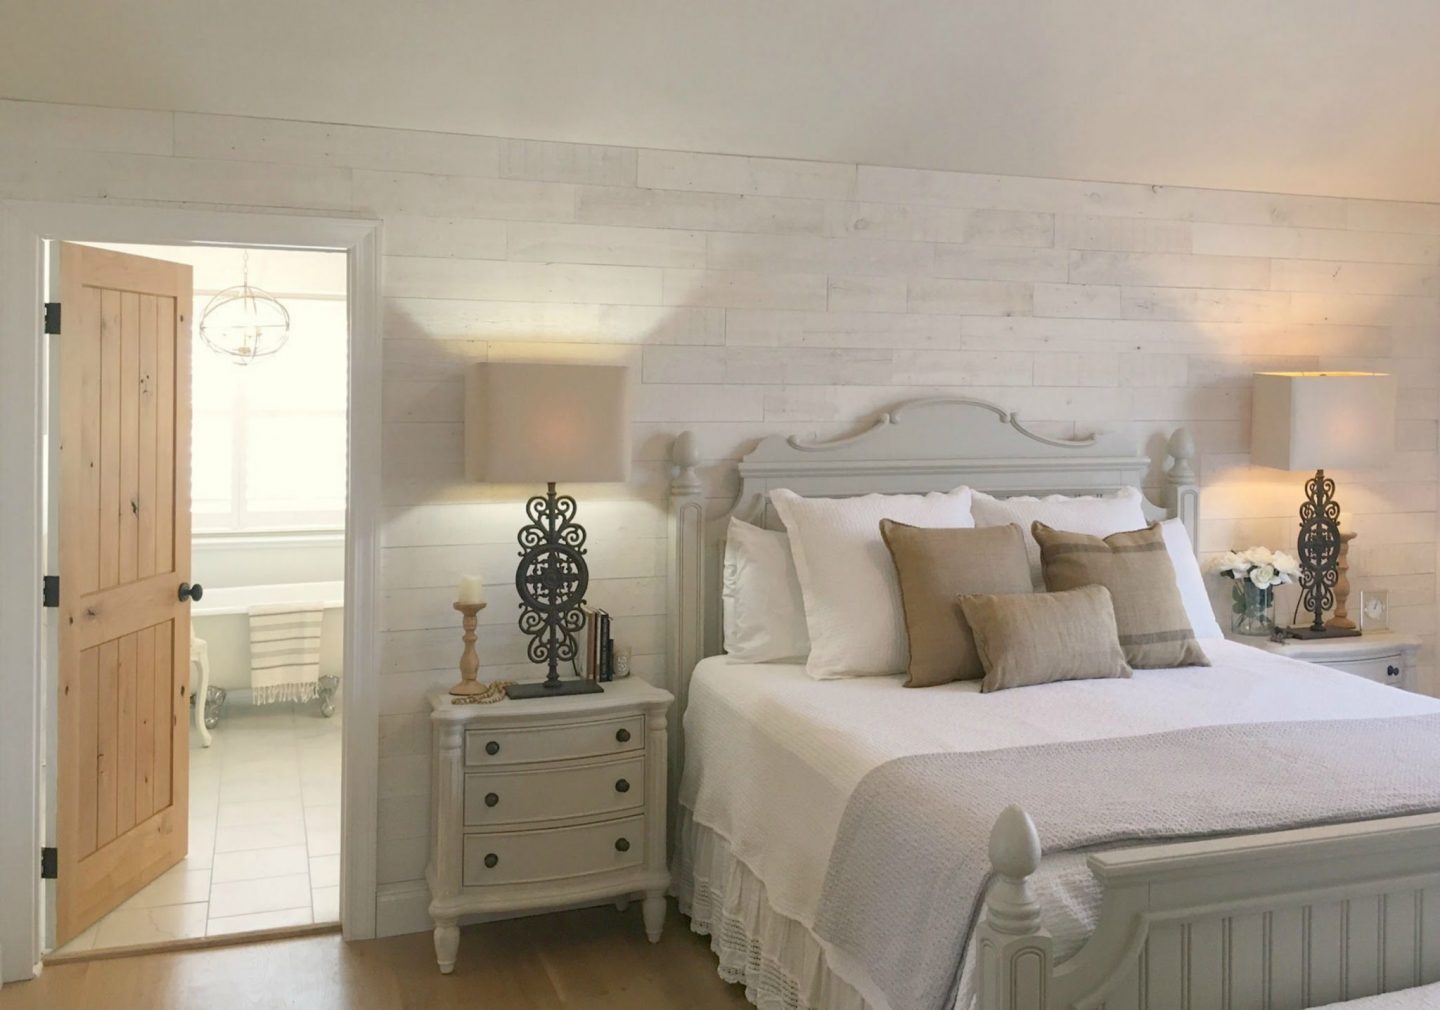 My serene white bedroom with Stikwood (Hamptons) statement wall, cottage style furniture, knotty alder door with oiled bronze hardware, and white oak wide plank hardwood flooring. Come explore How to Decorate a Room Without Breaking the Bank: Low Cost Design Reminders.